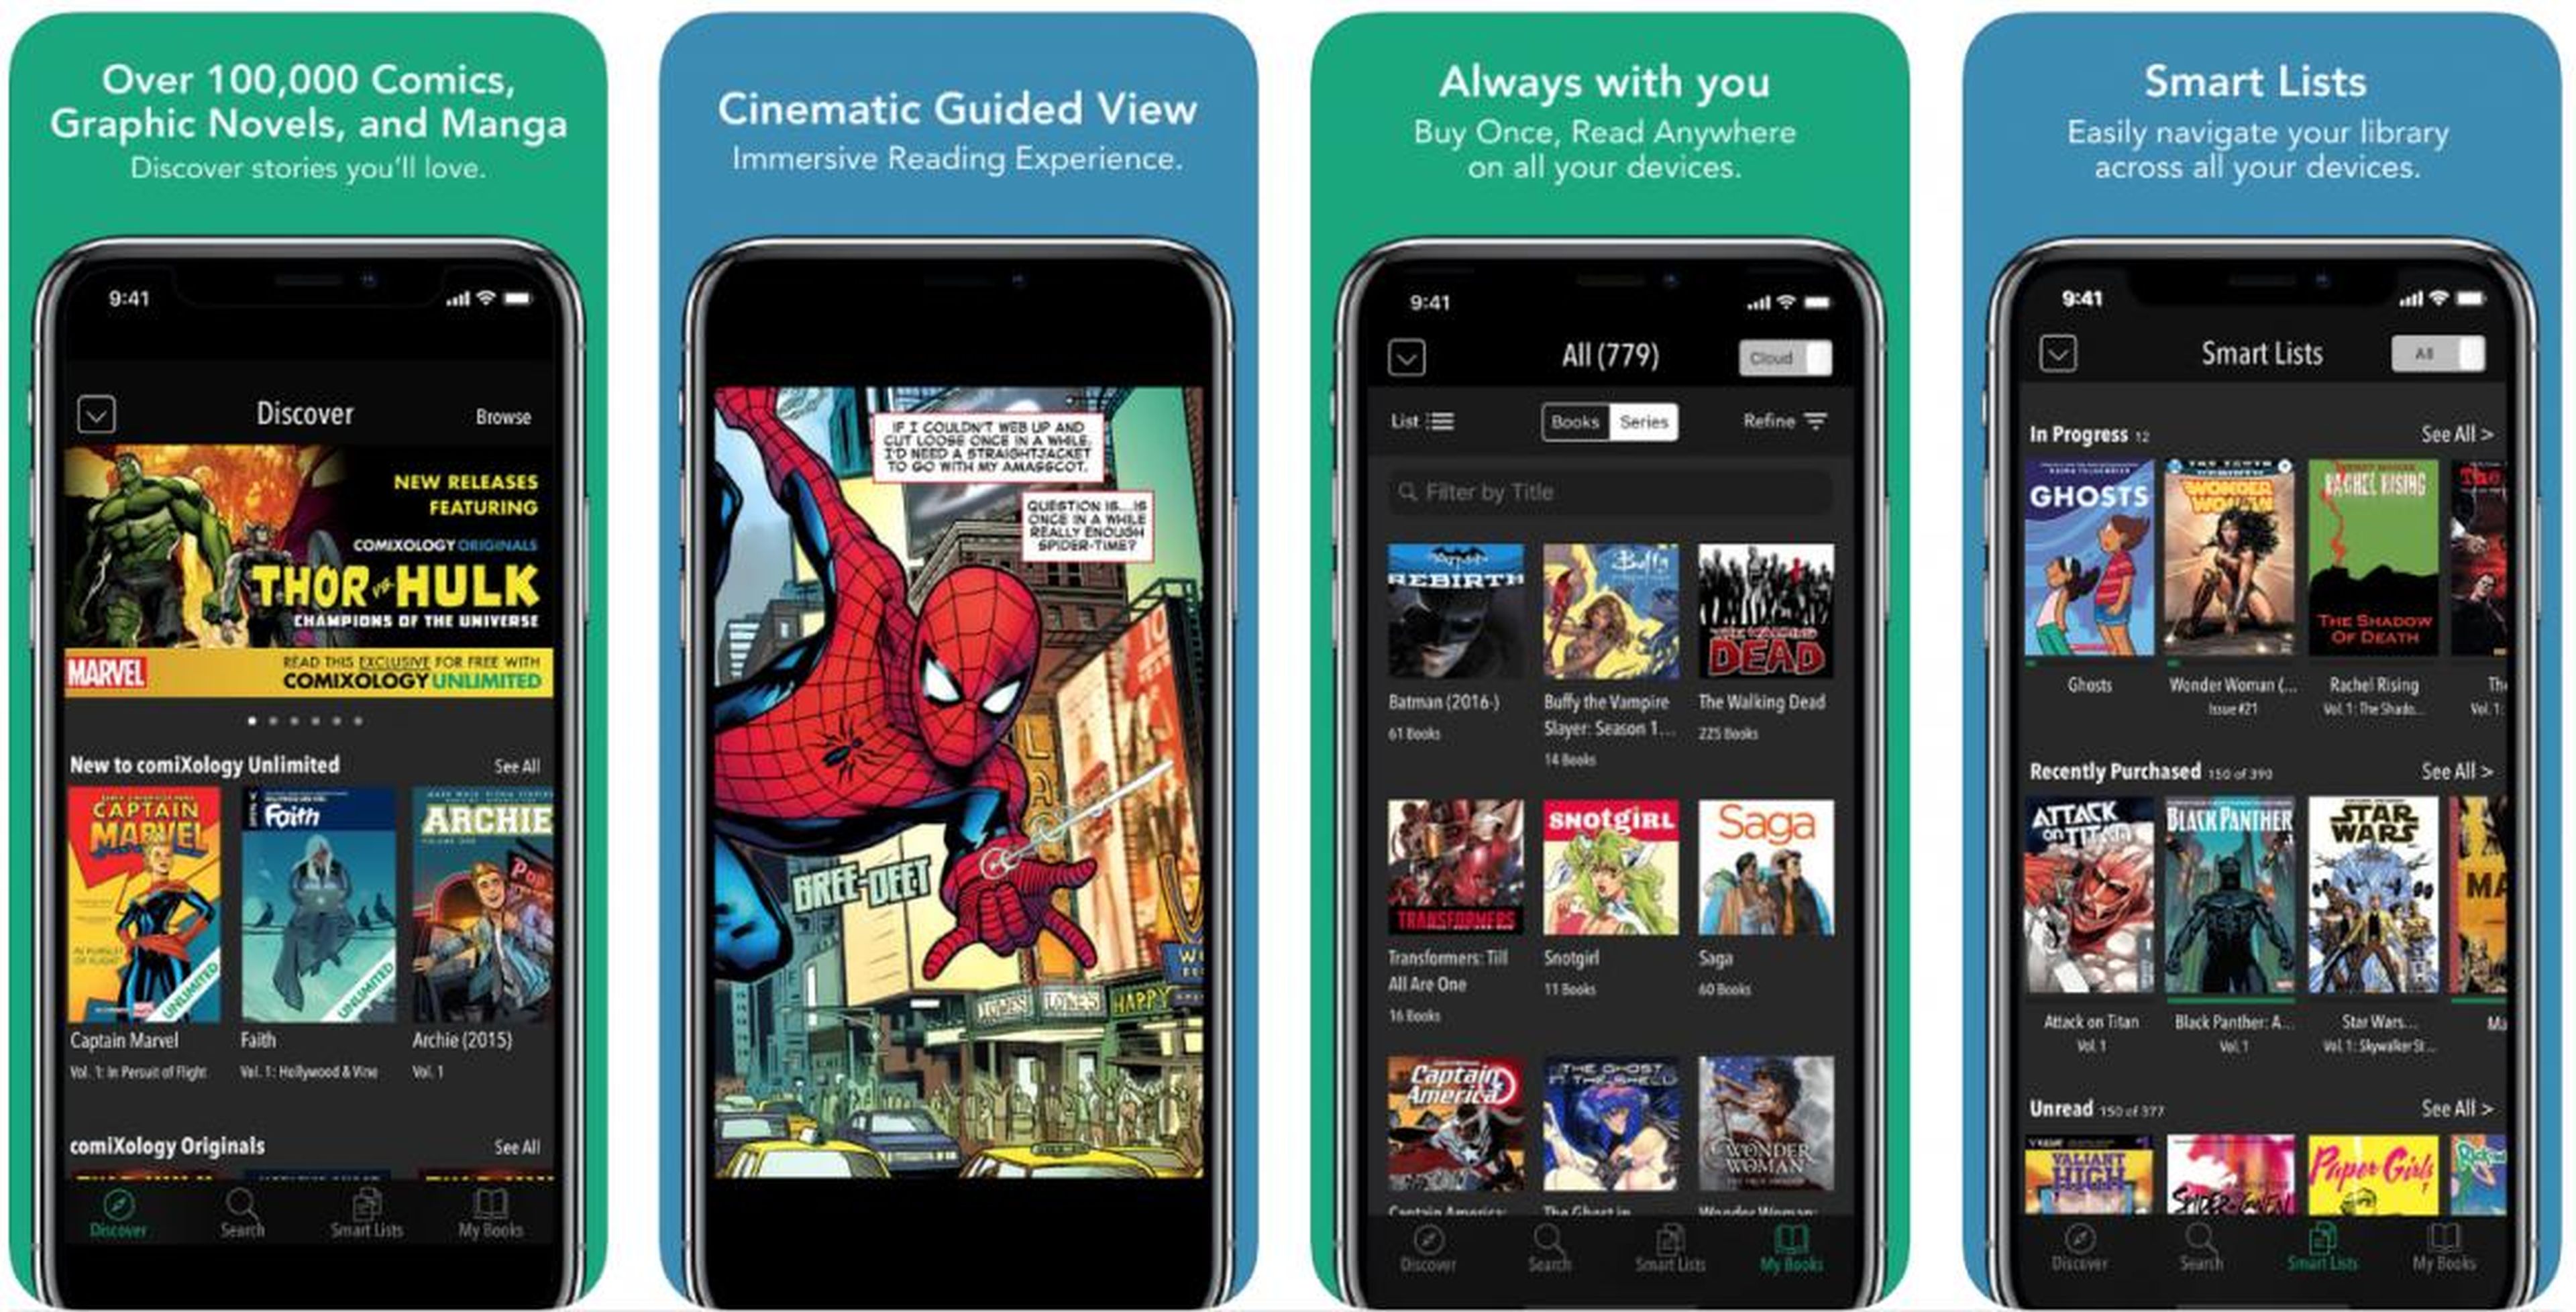 Comixology by Amazon lets you read comics on your smartphone.